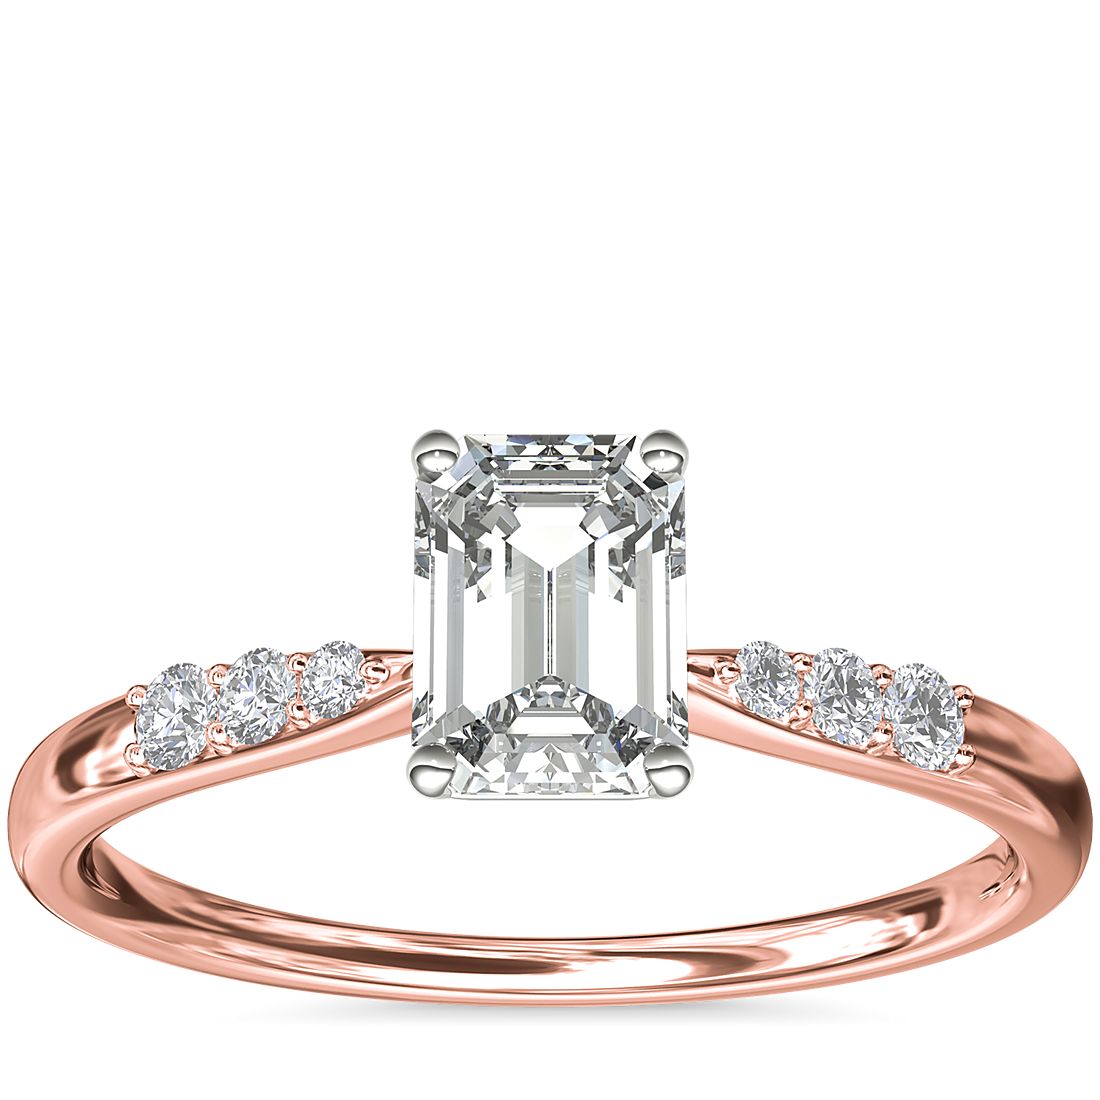 A rose gold engagement ring with an emerald 1-carat diamond.